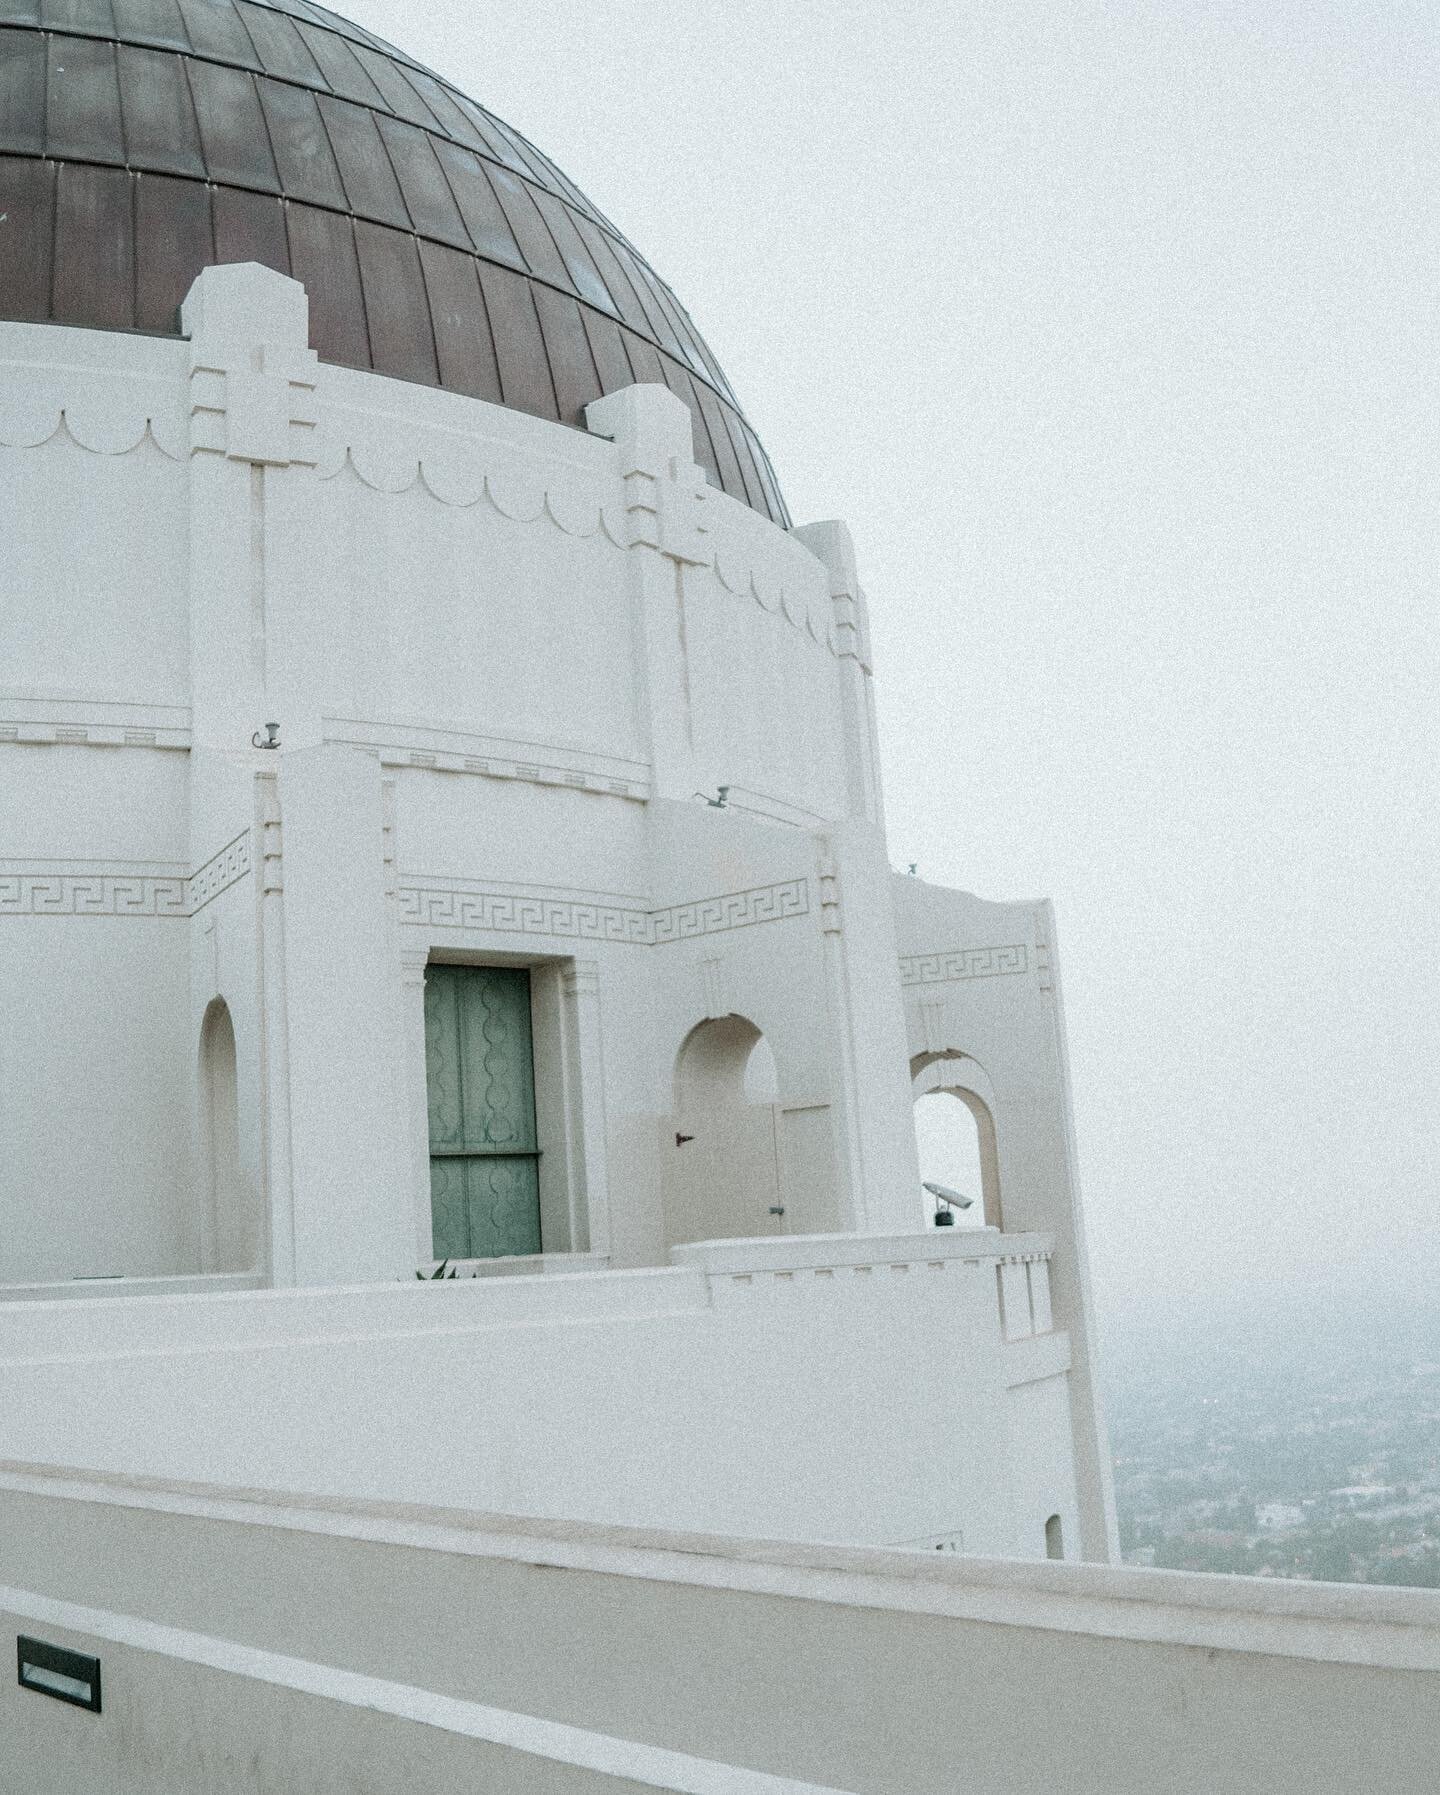 griffith observatory, los angeles

// got like 4 hours of sleep in order to catch a golden sunrise at griffith only for it to be too cloudy to see the sun at all. but isn&rsquo;t that just like life? and yet theres still beauty to be found even in th